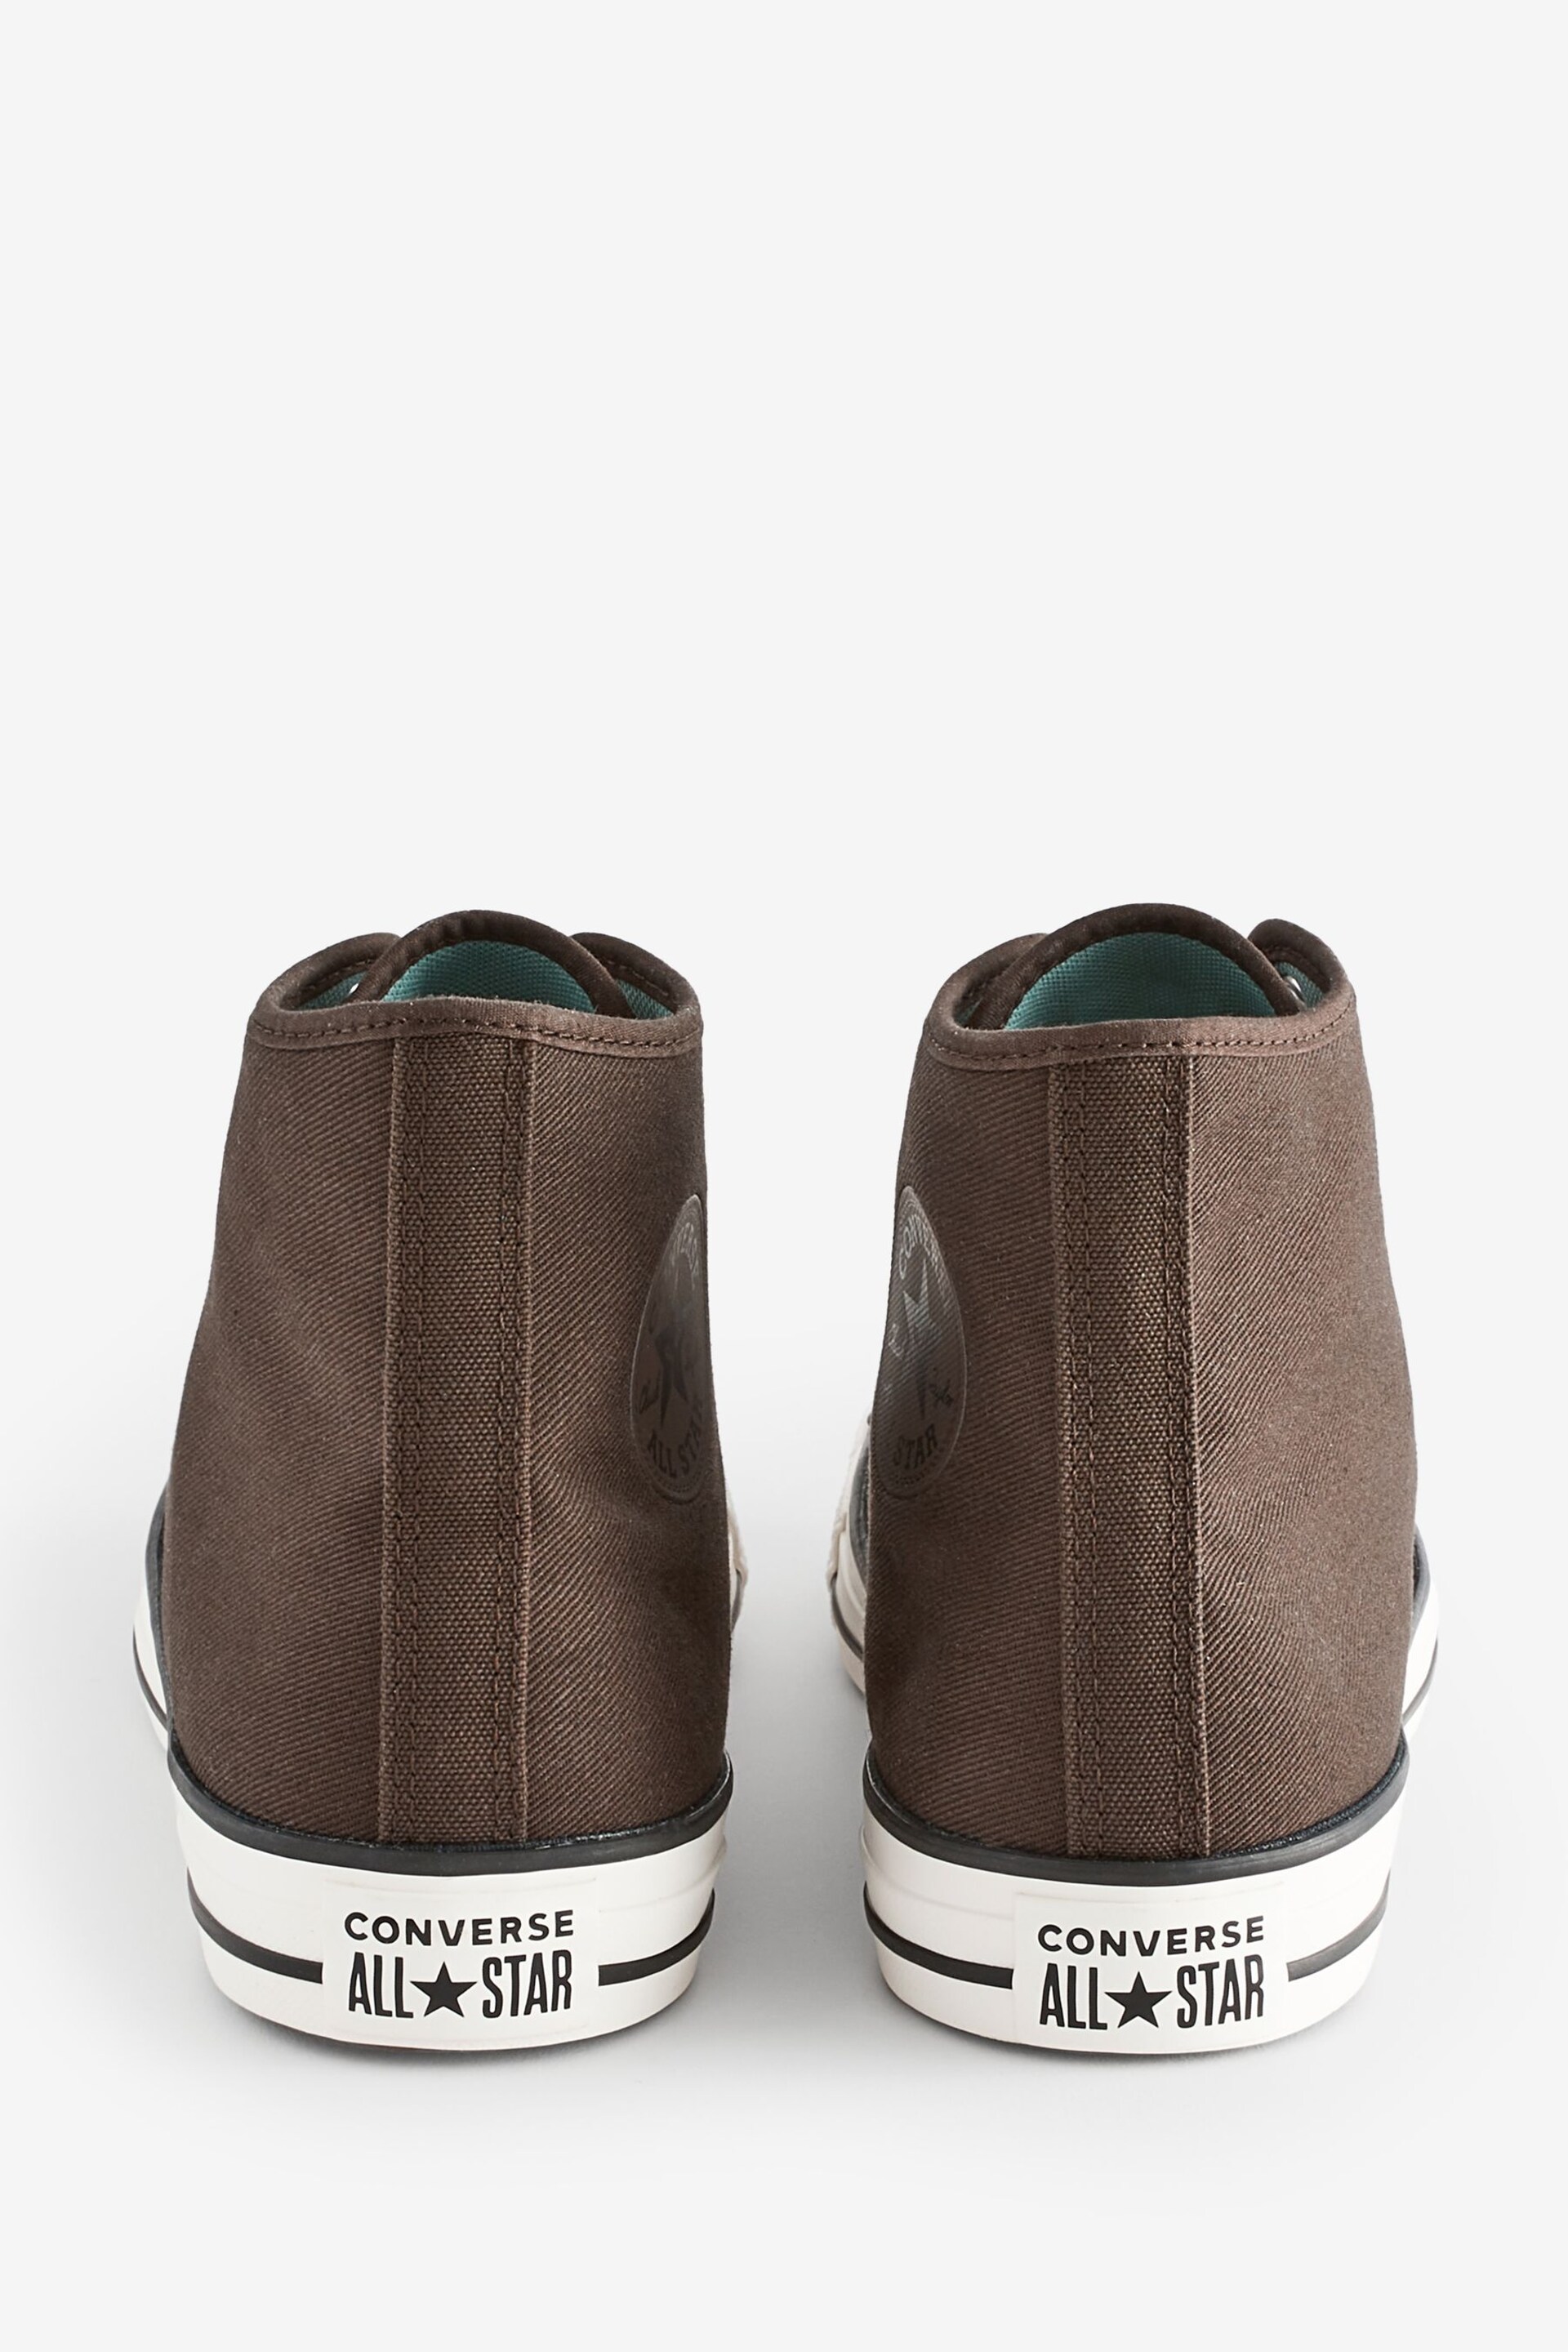 Converse Brown Chuck Taylor All Star High Top Trainers - Image 4 of 12